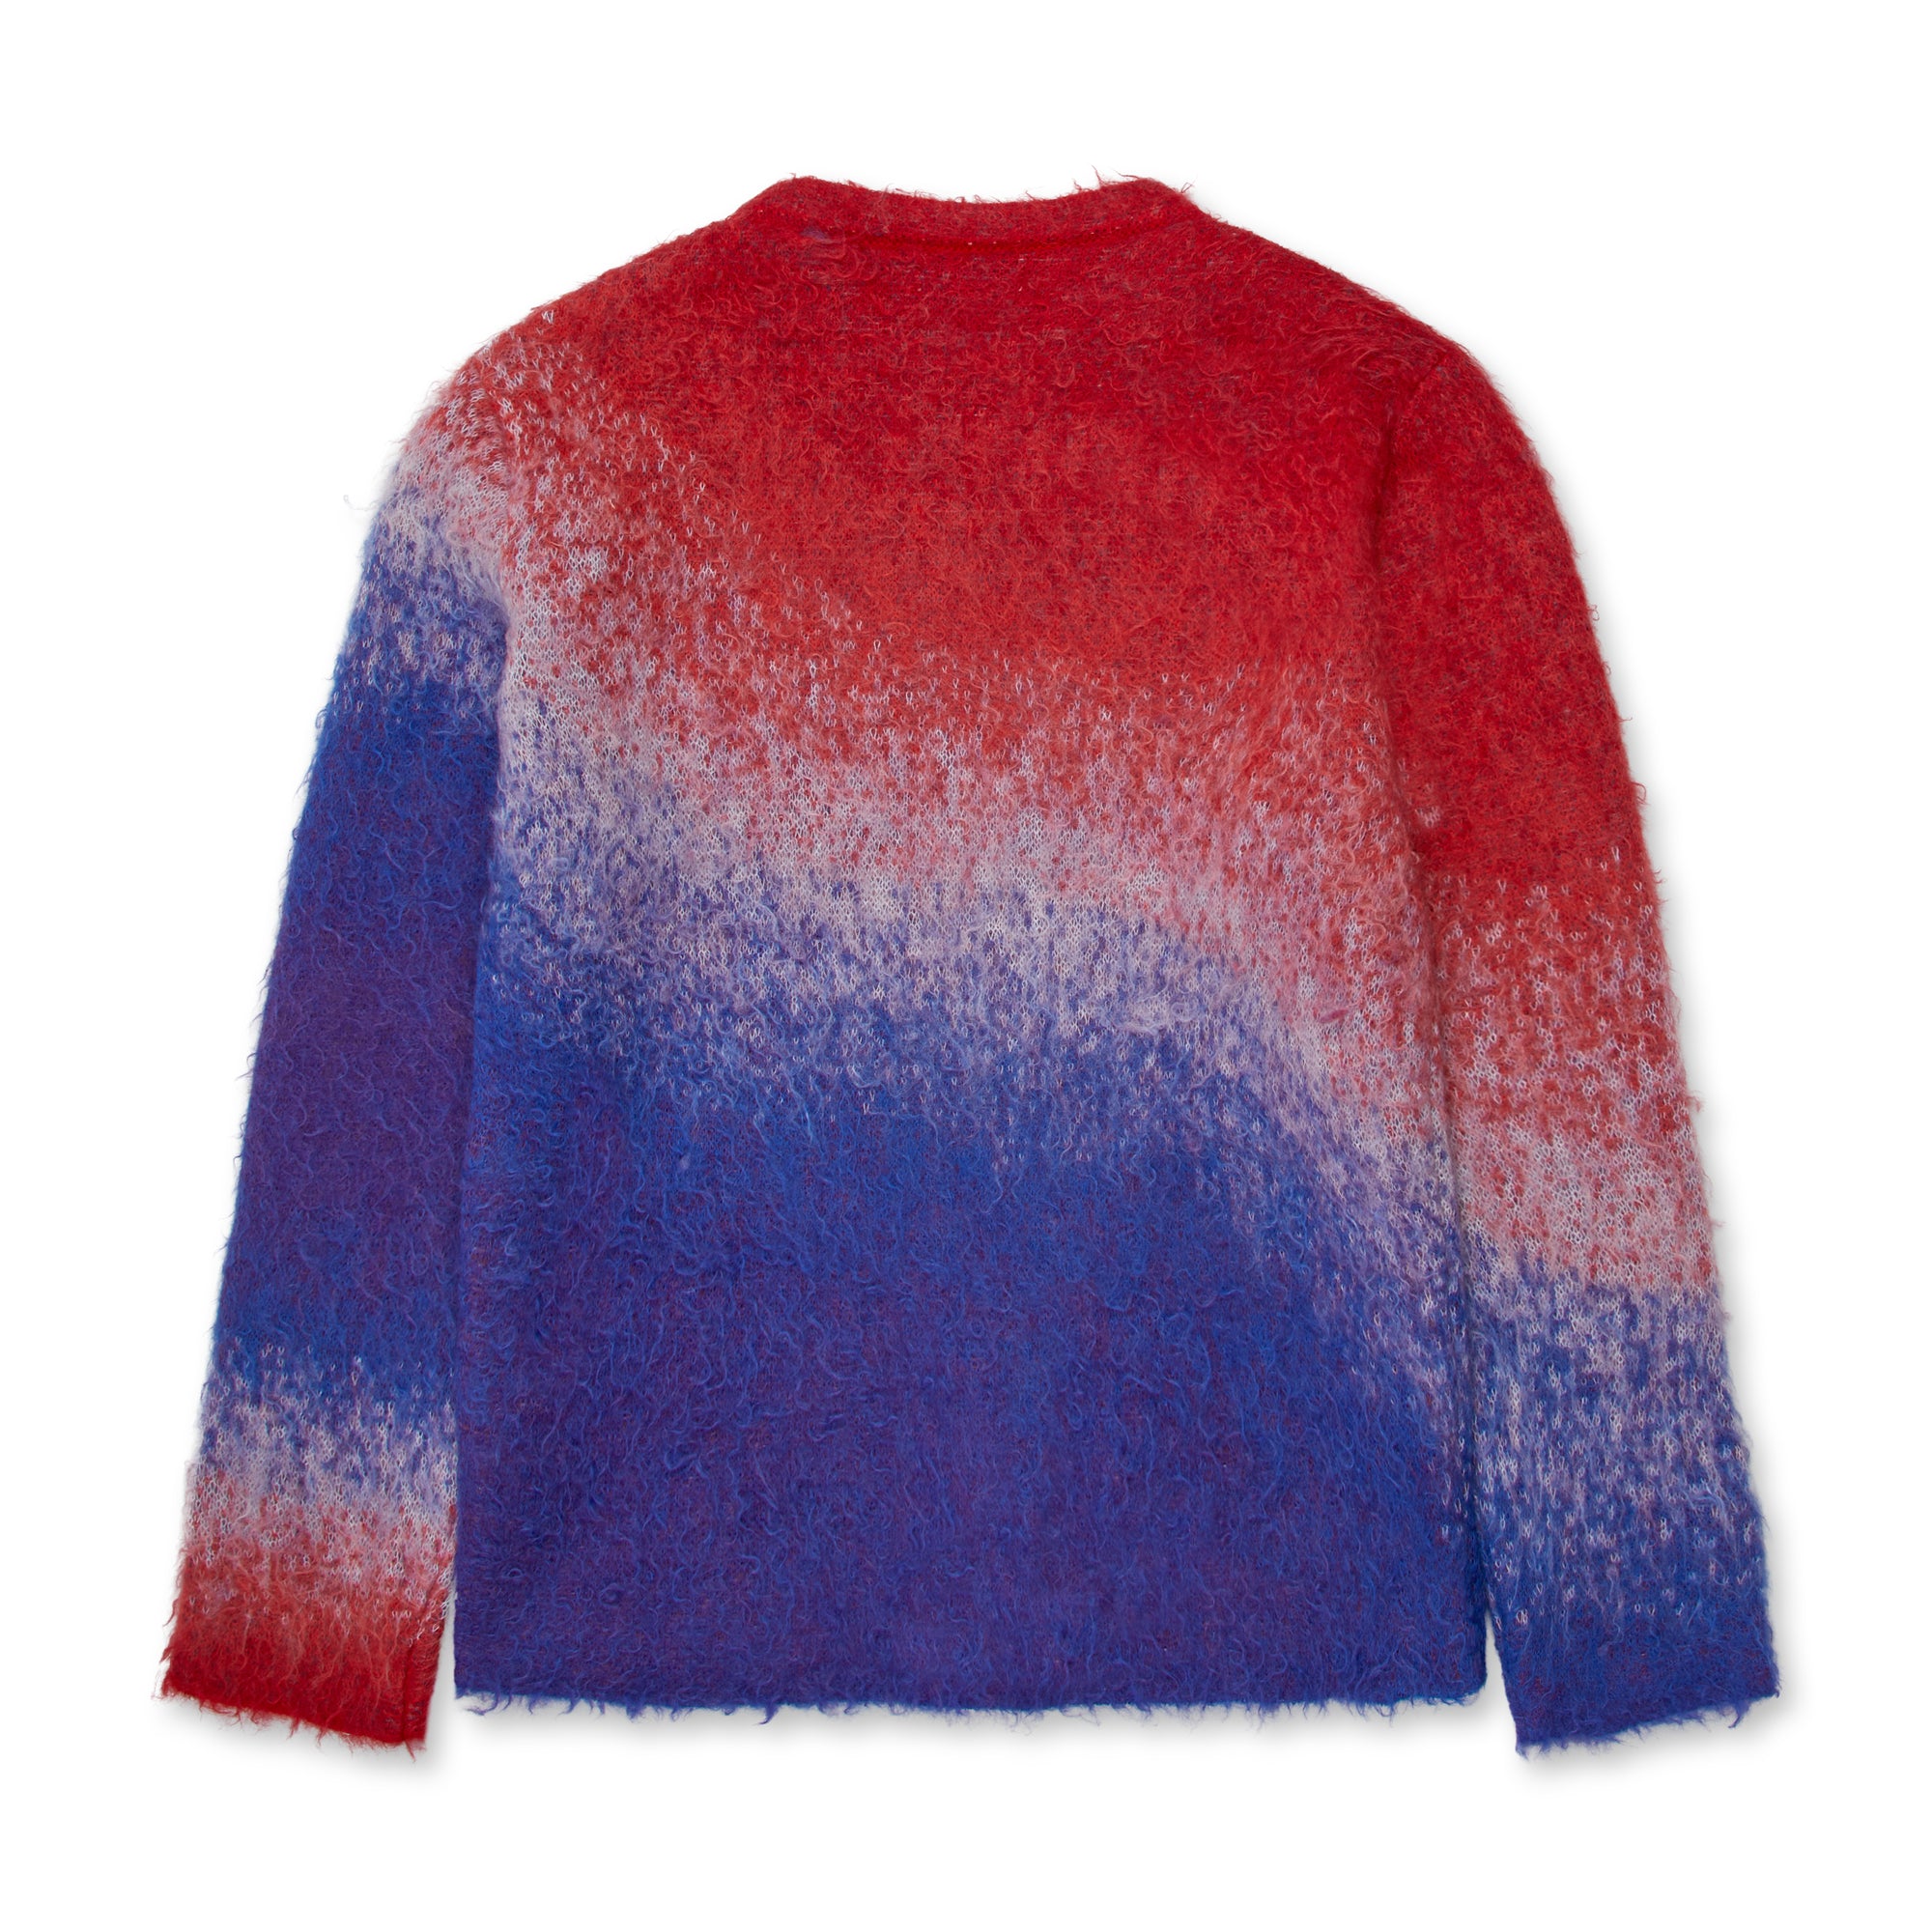 ERL - Degrade Gradient Sweater - (Blue/Red) view 2